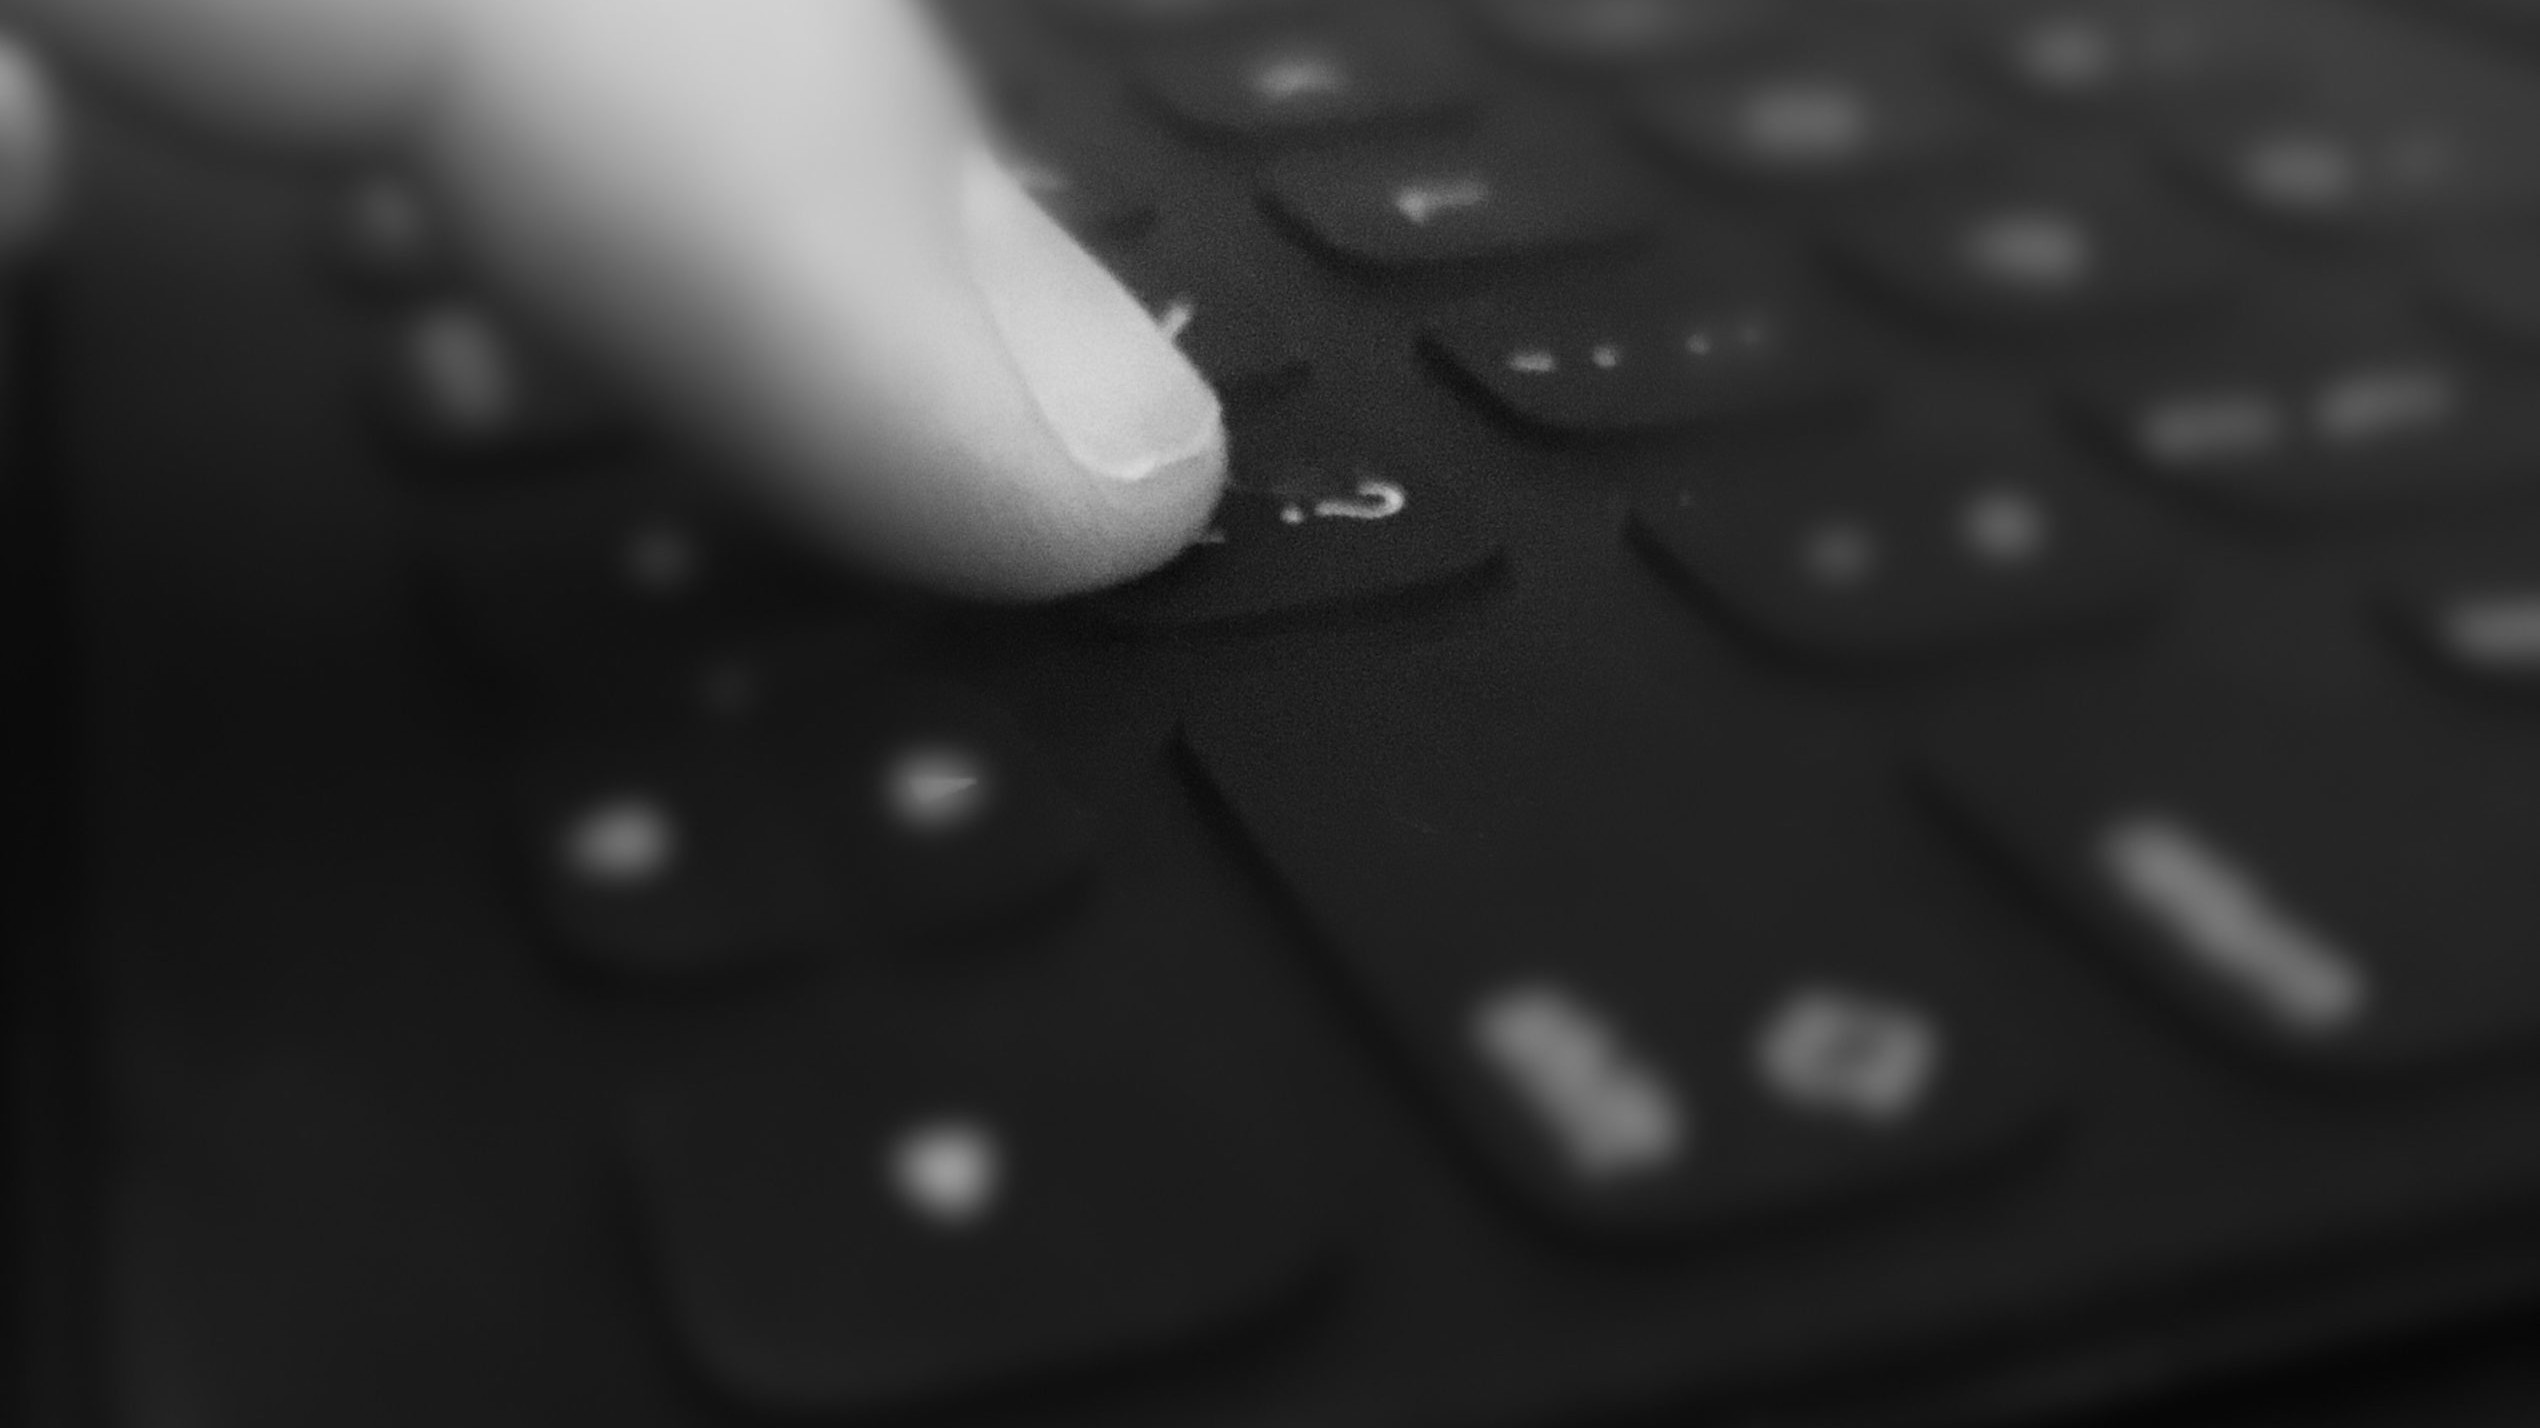 A pointer finger touches the question mark key on a keyboard. Black and white filter shades photo.